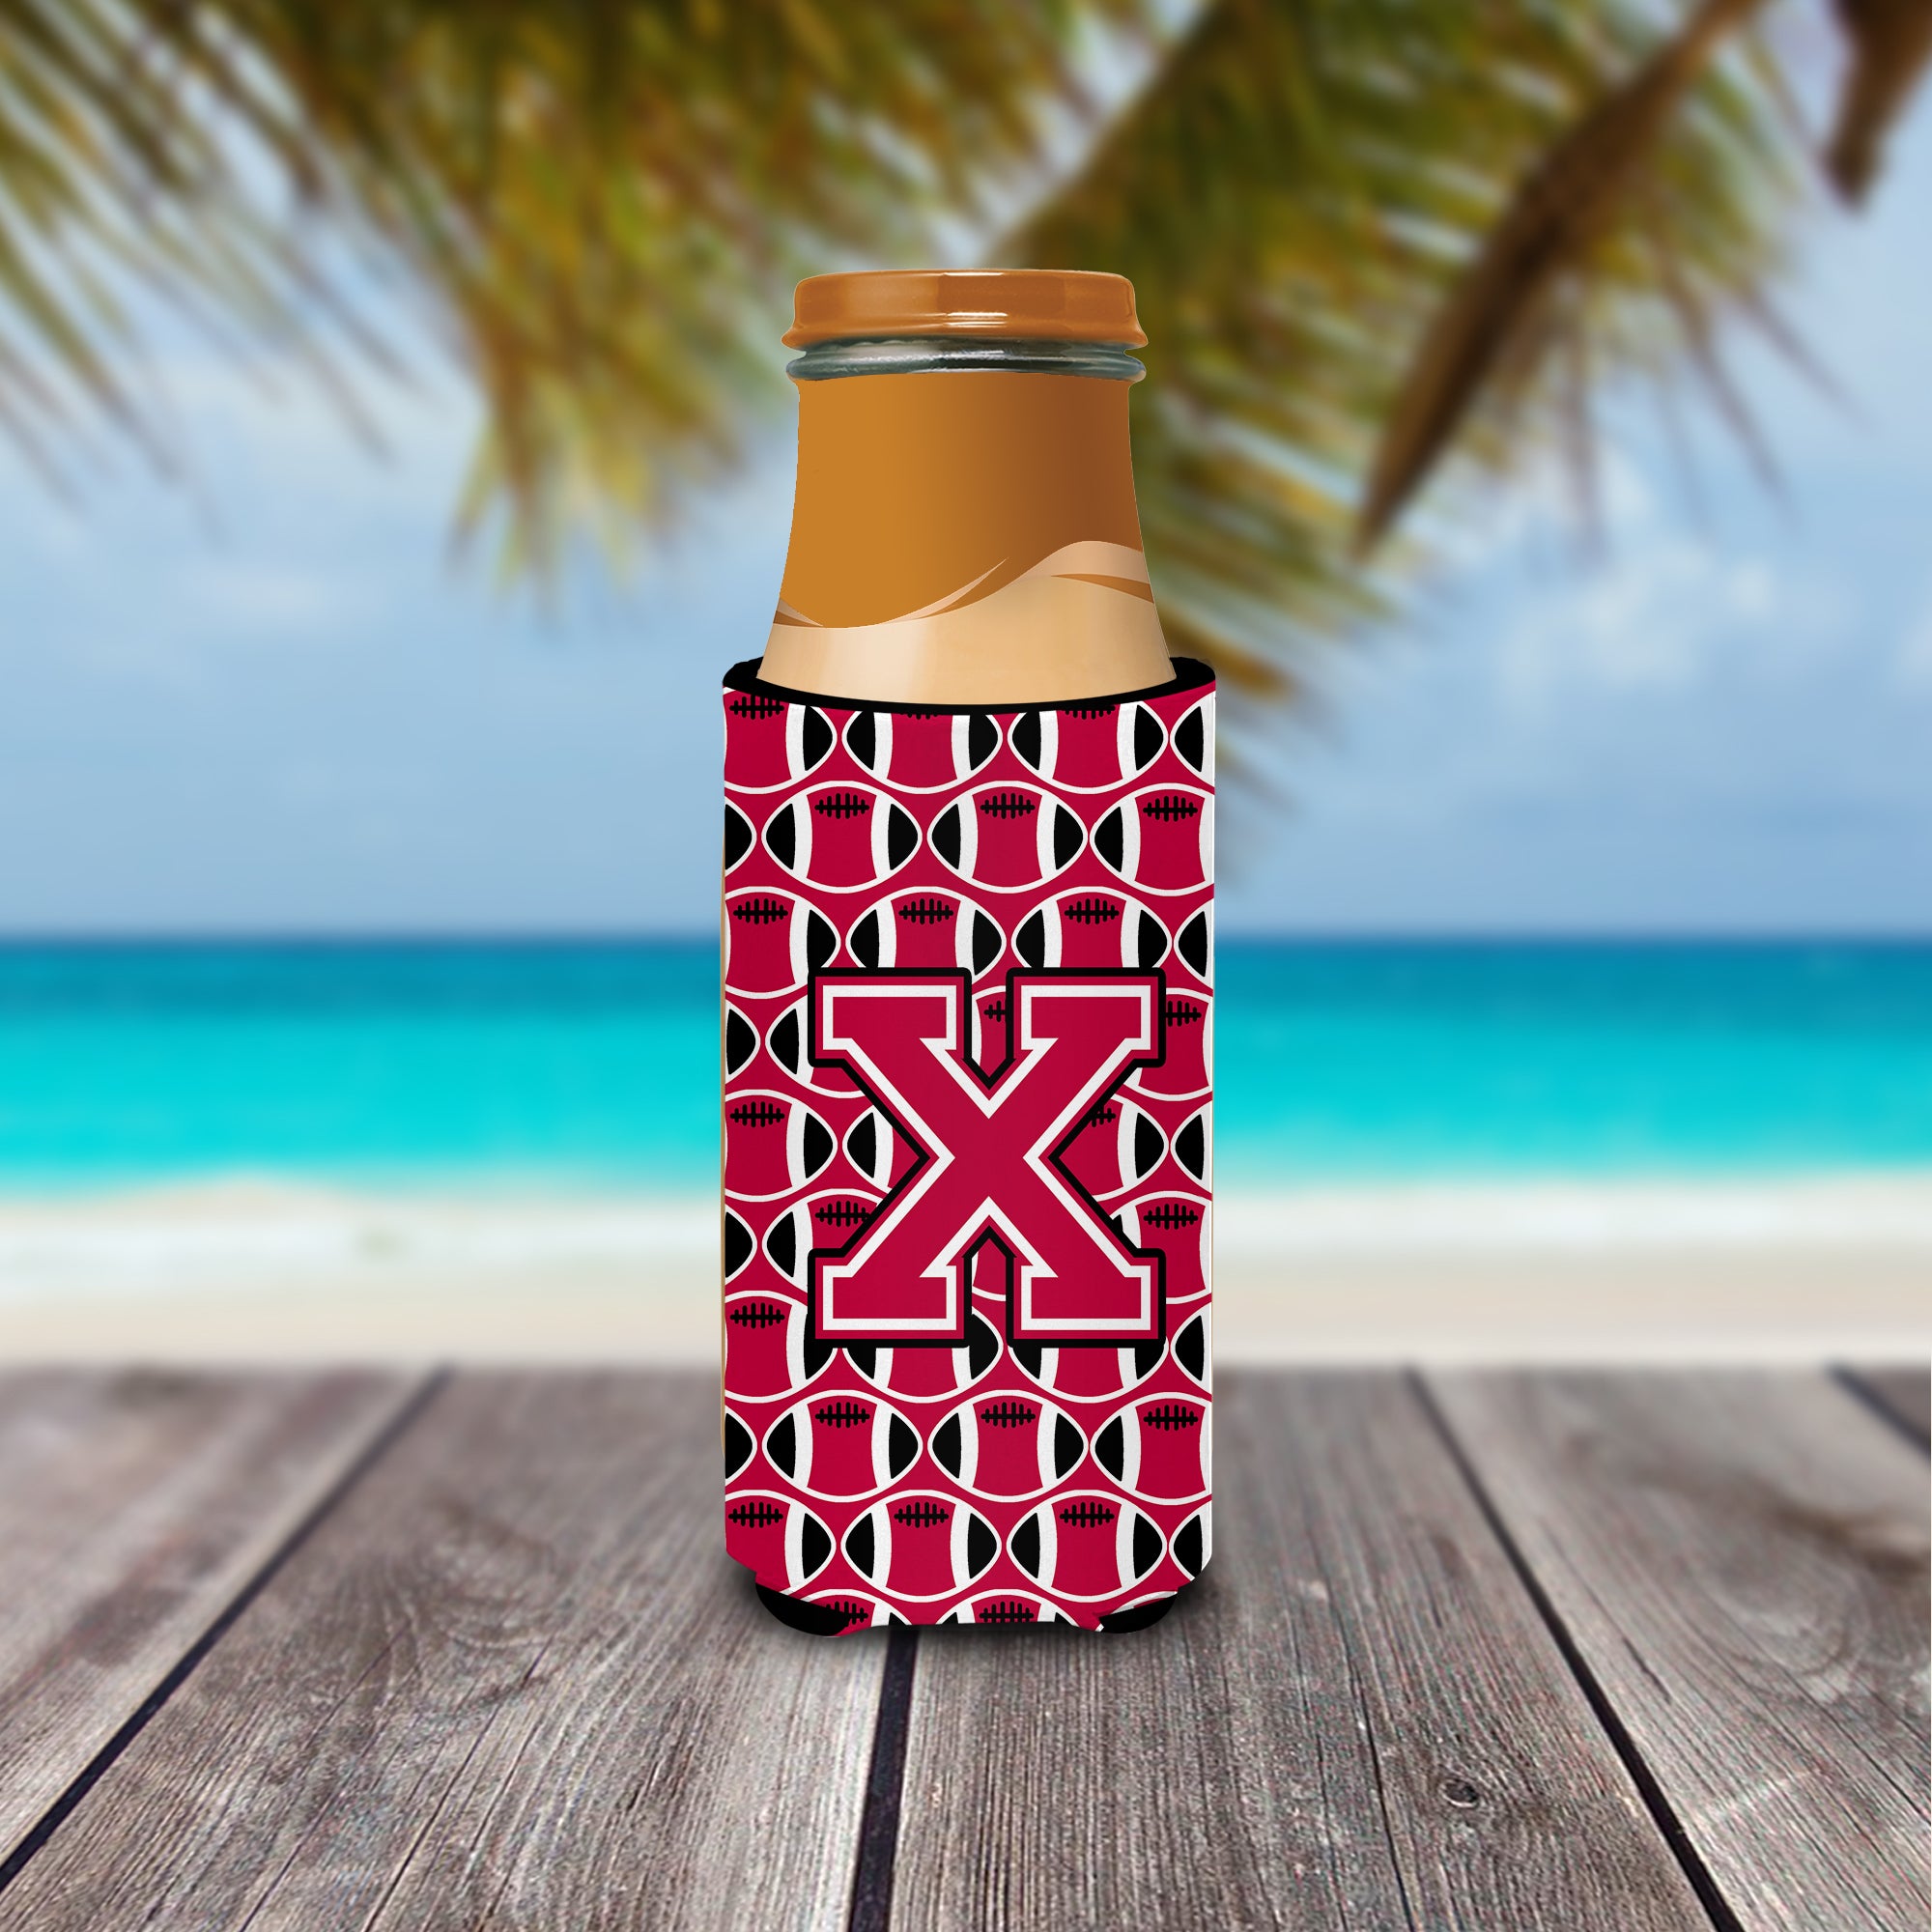 Letter X Football Crimson and White Ultra Beverage Insulators for slim cans CJ1079-XMUK